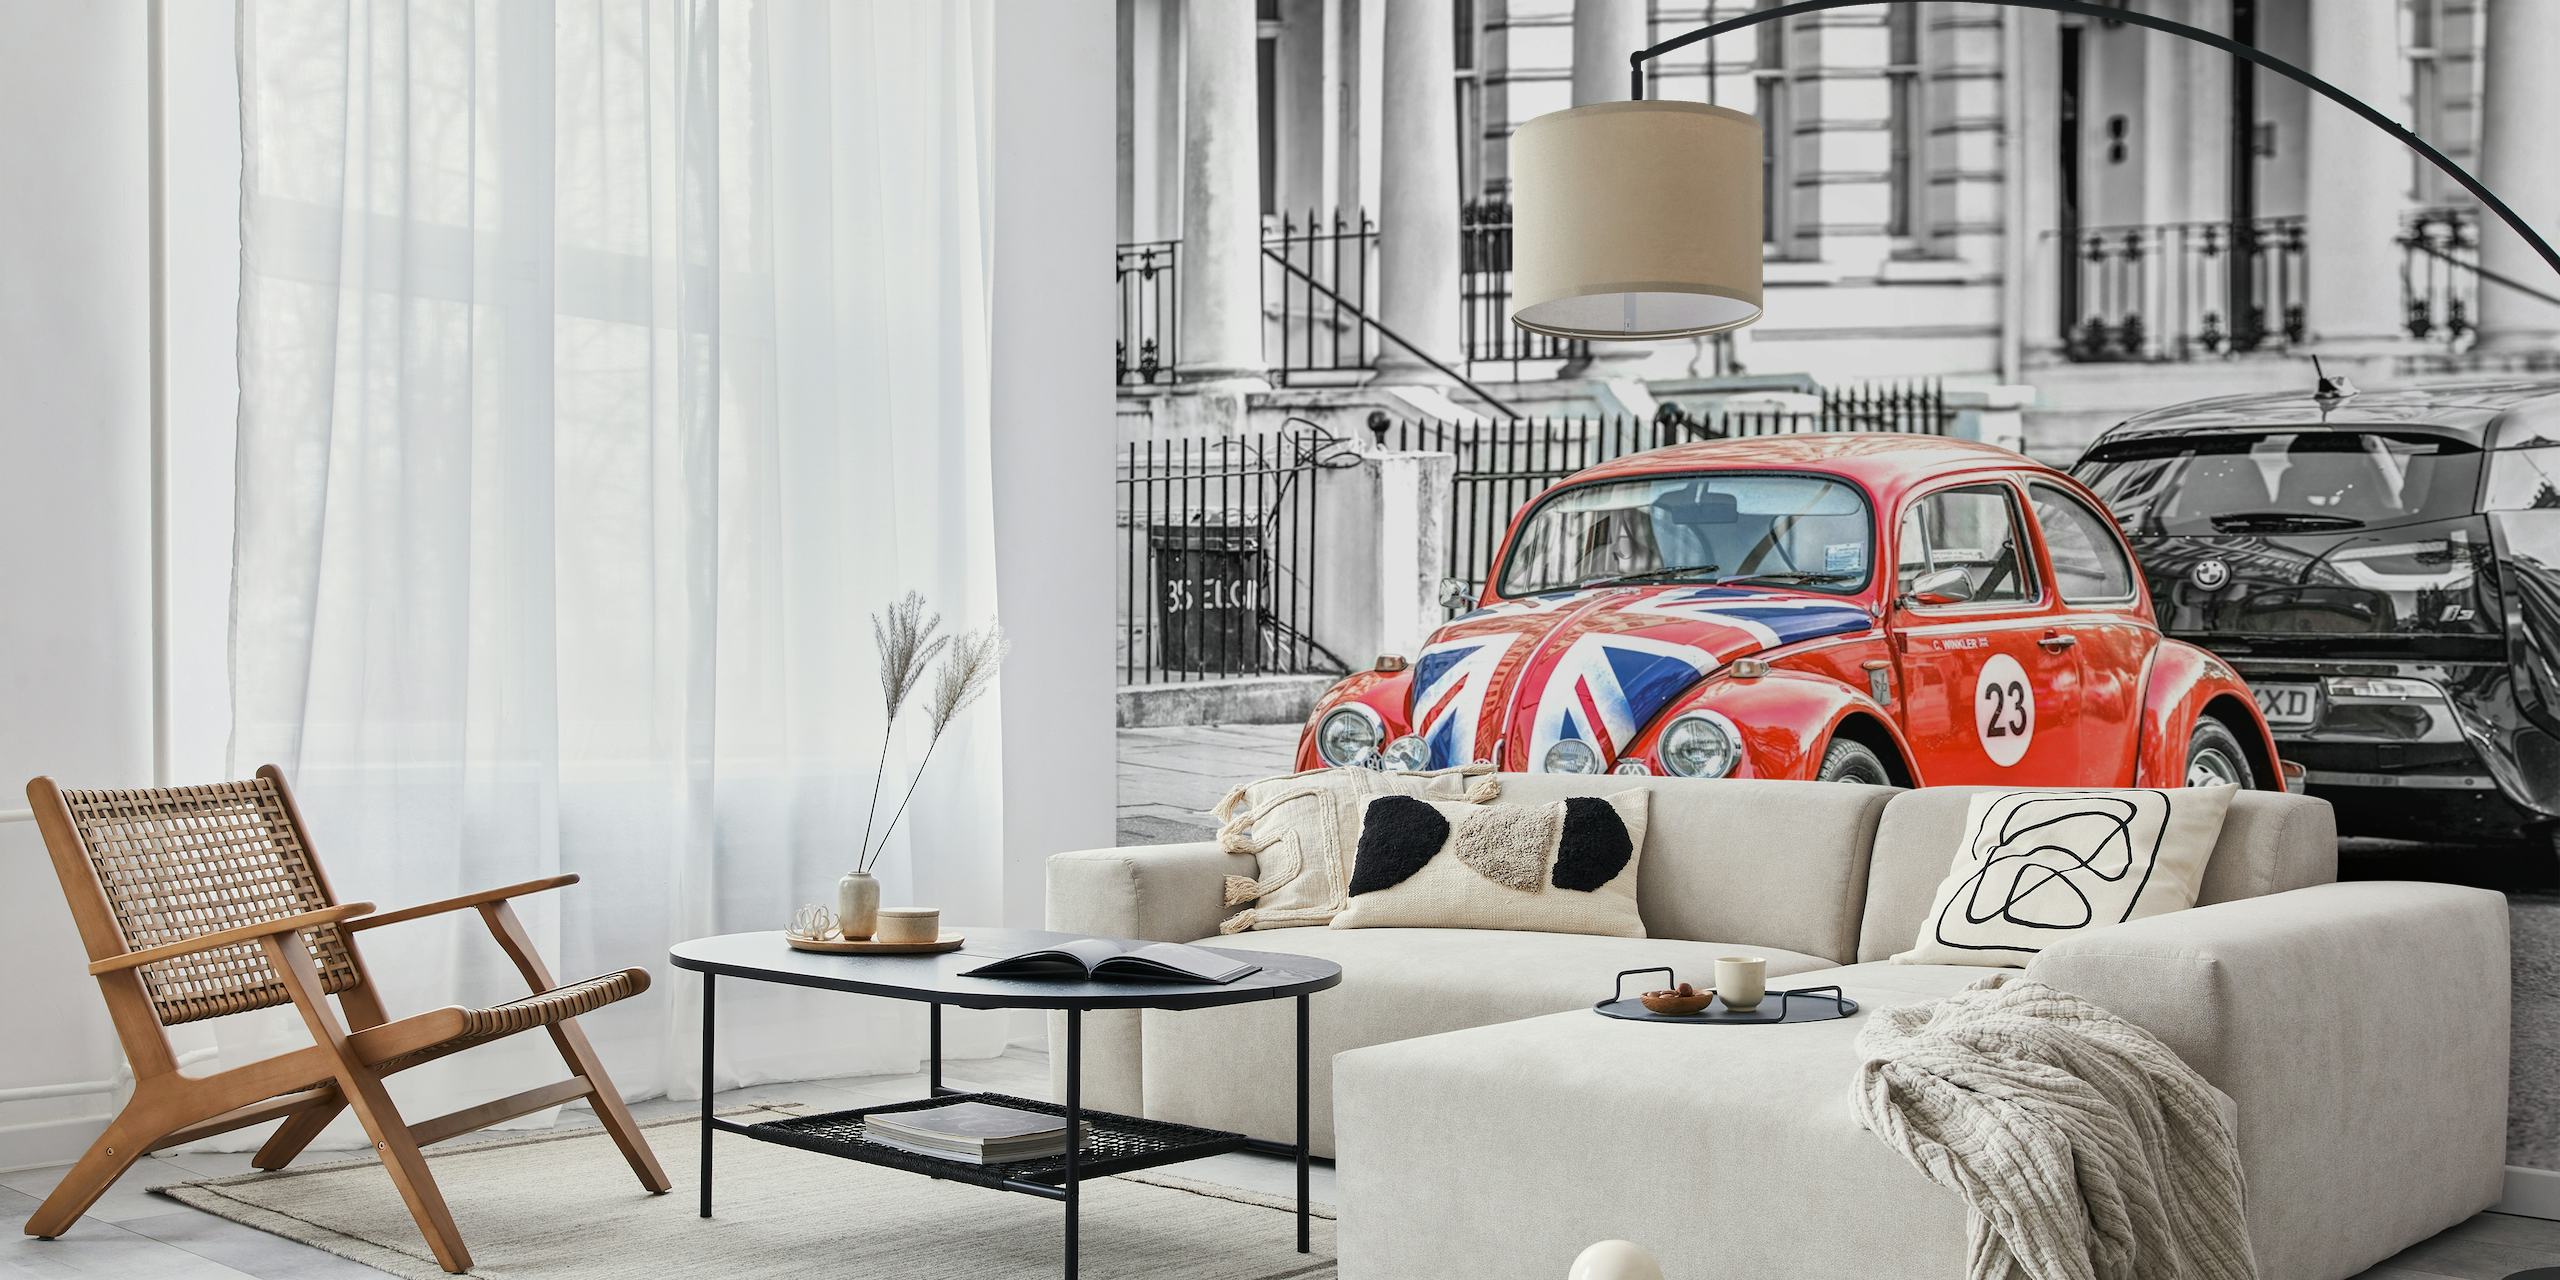 Iconic British car with Union Jack design in selective color